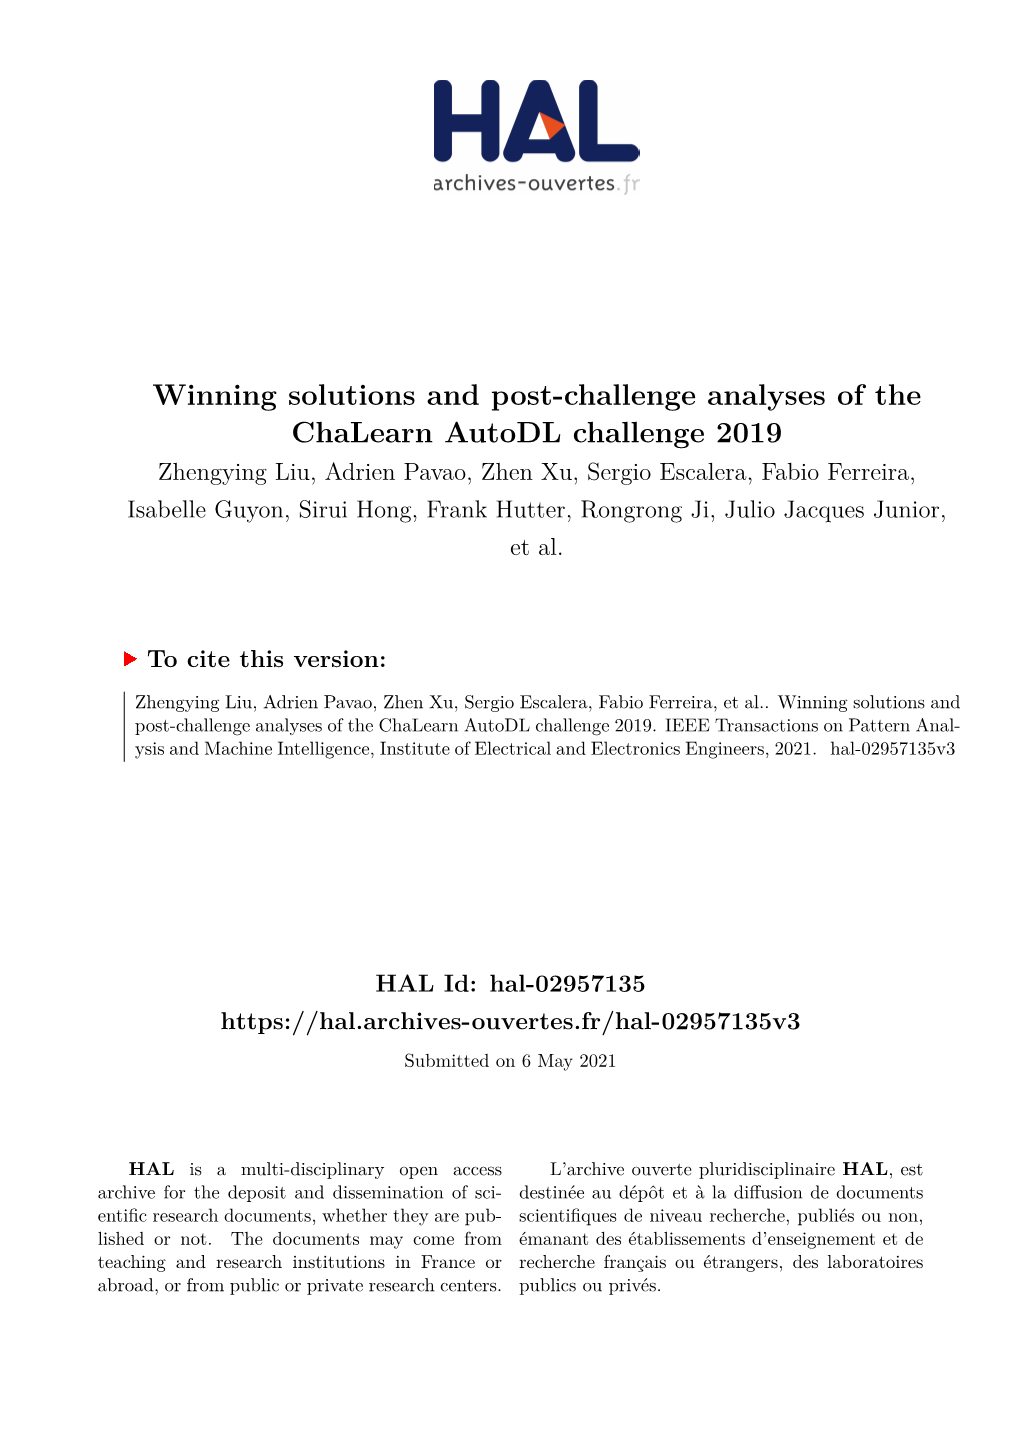 Winning Solutions and Post-Challenge Analyses of the Chalearn Autodl